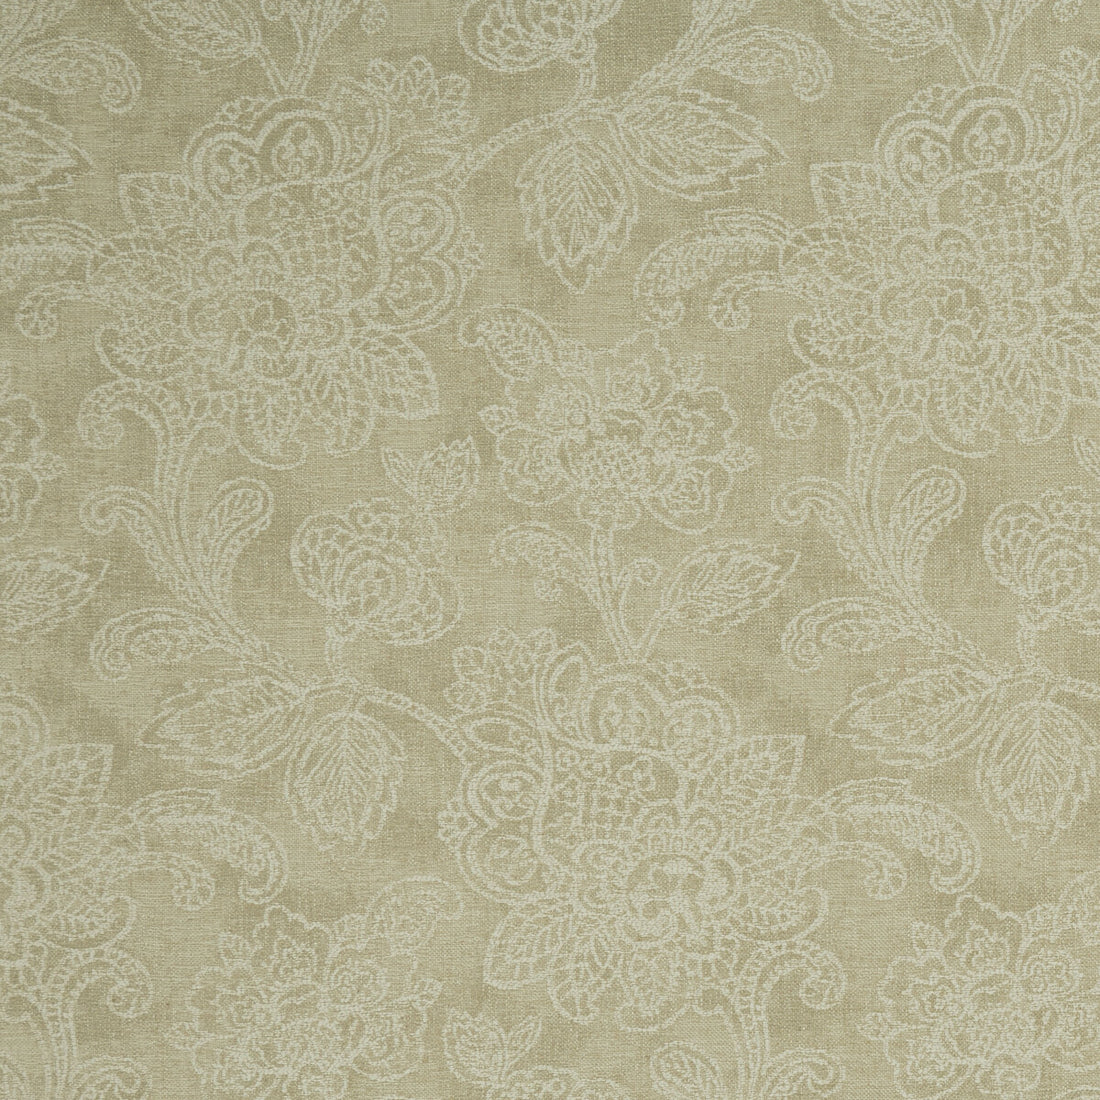 Cranbrook fabric in linen color - pattern F1044/04.CAC.0 - by Clarke And Clarke in the Clarke &amp; Clarke Castle Garden collection